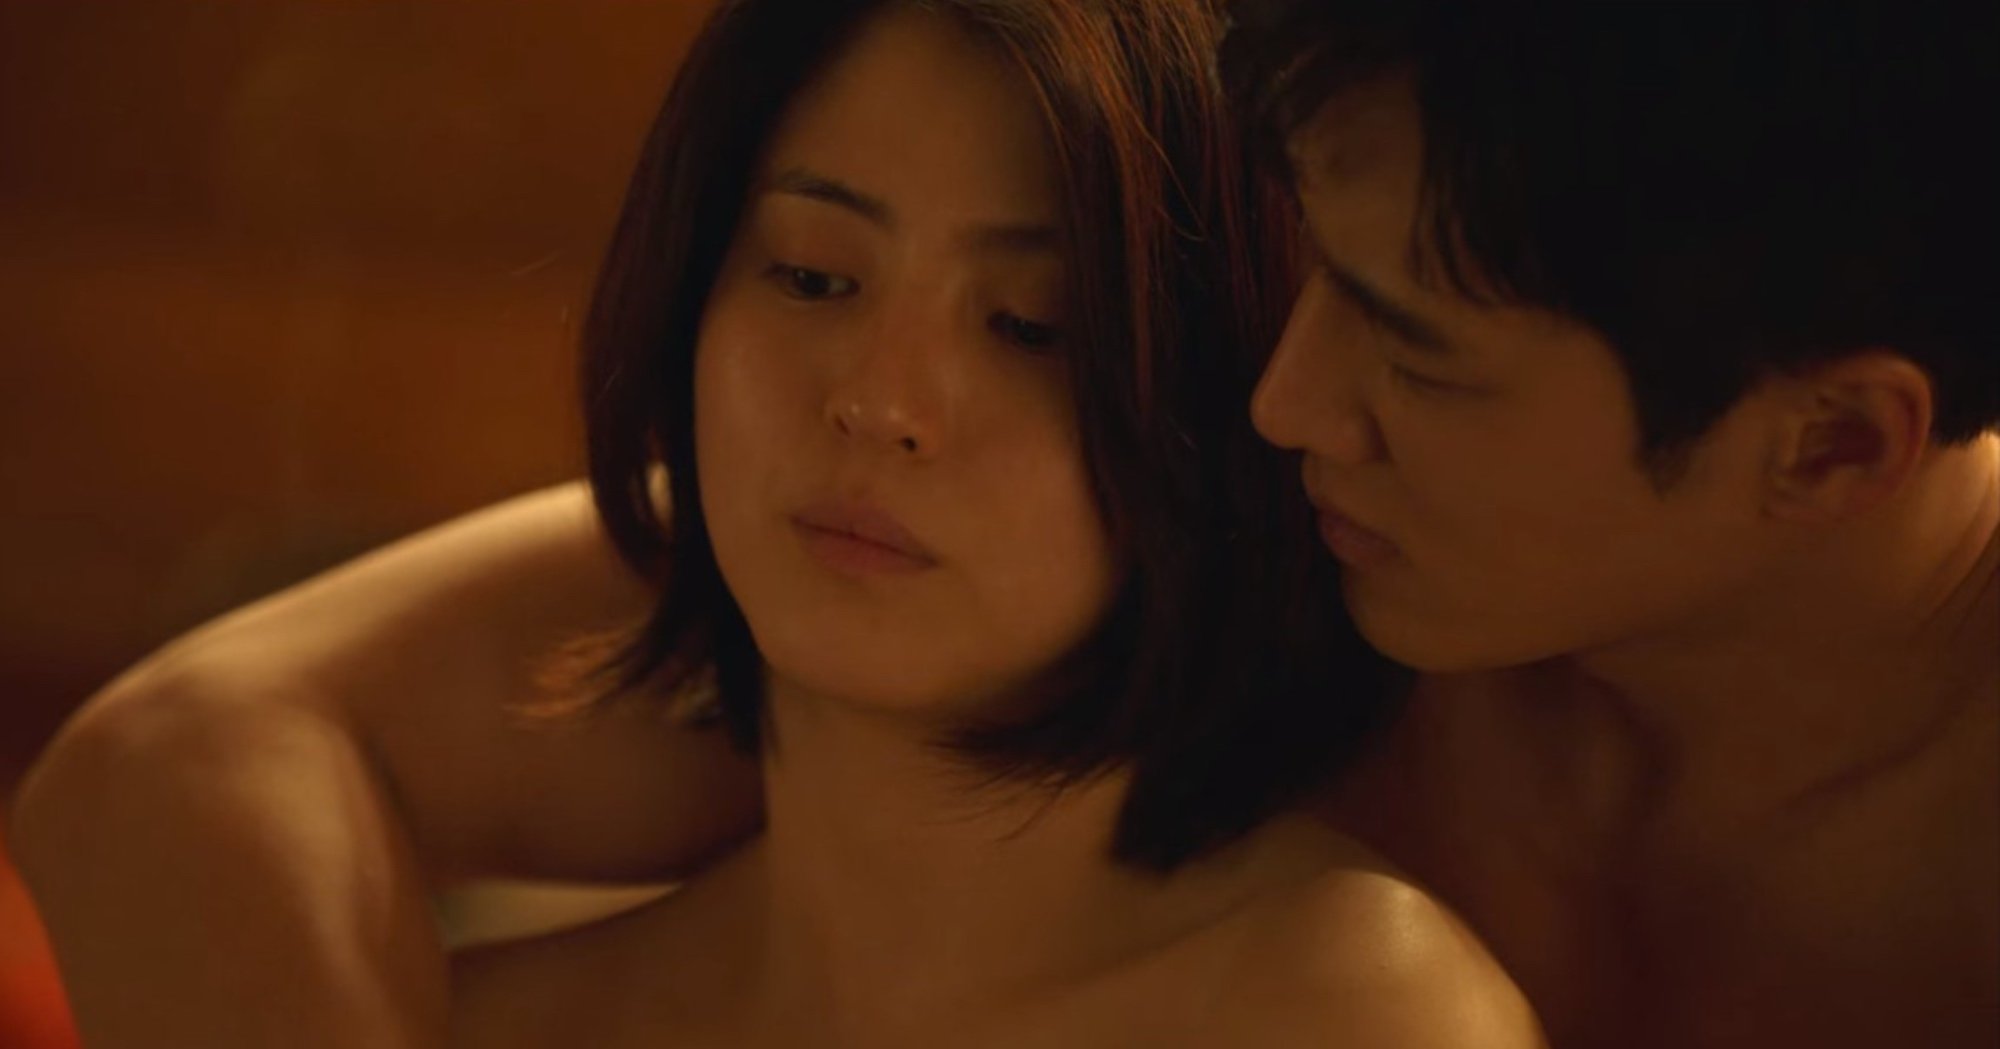 4 of the Most Explicit Sex Scenes From K-Dramas